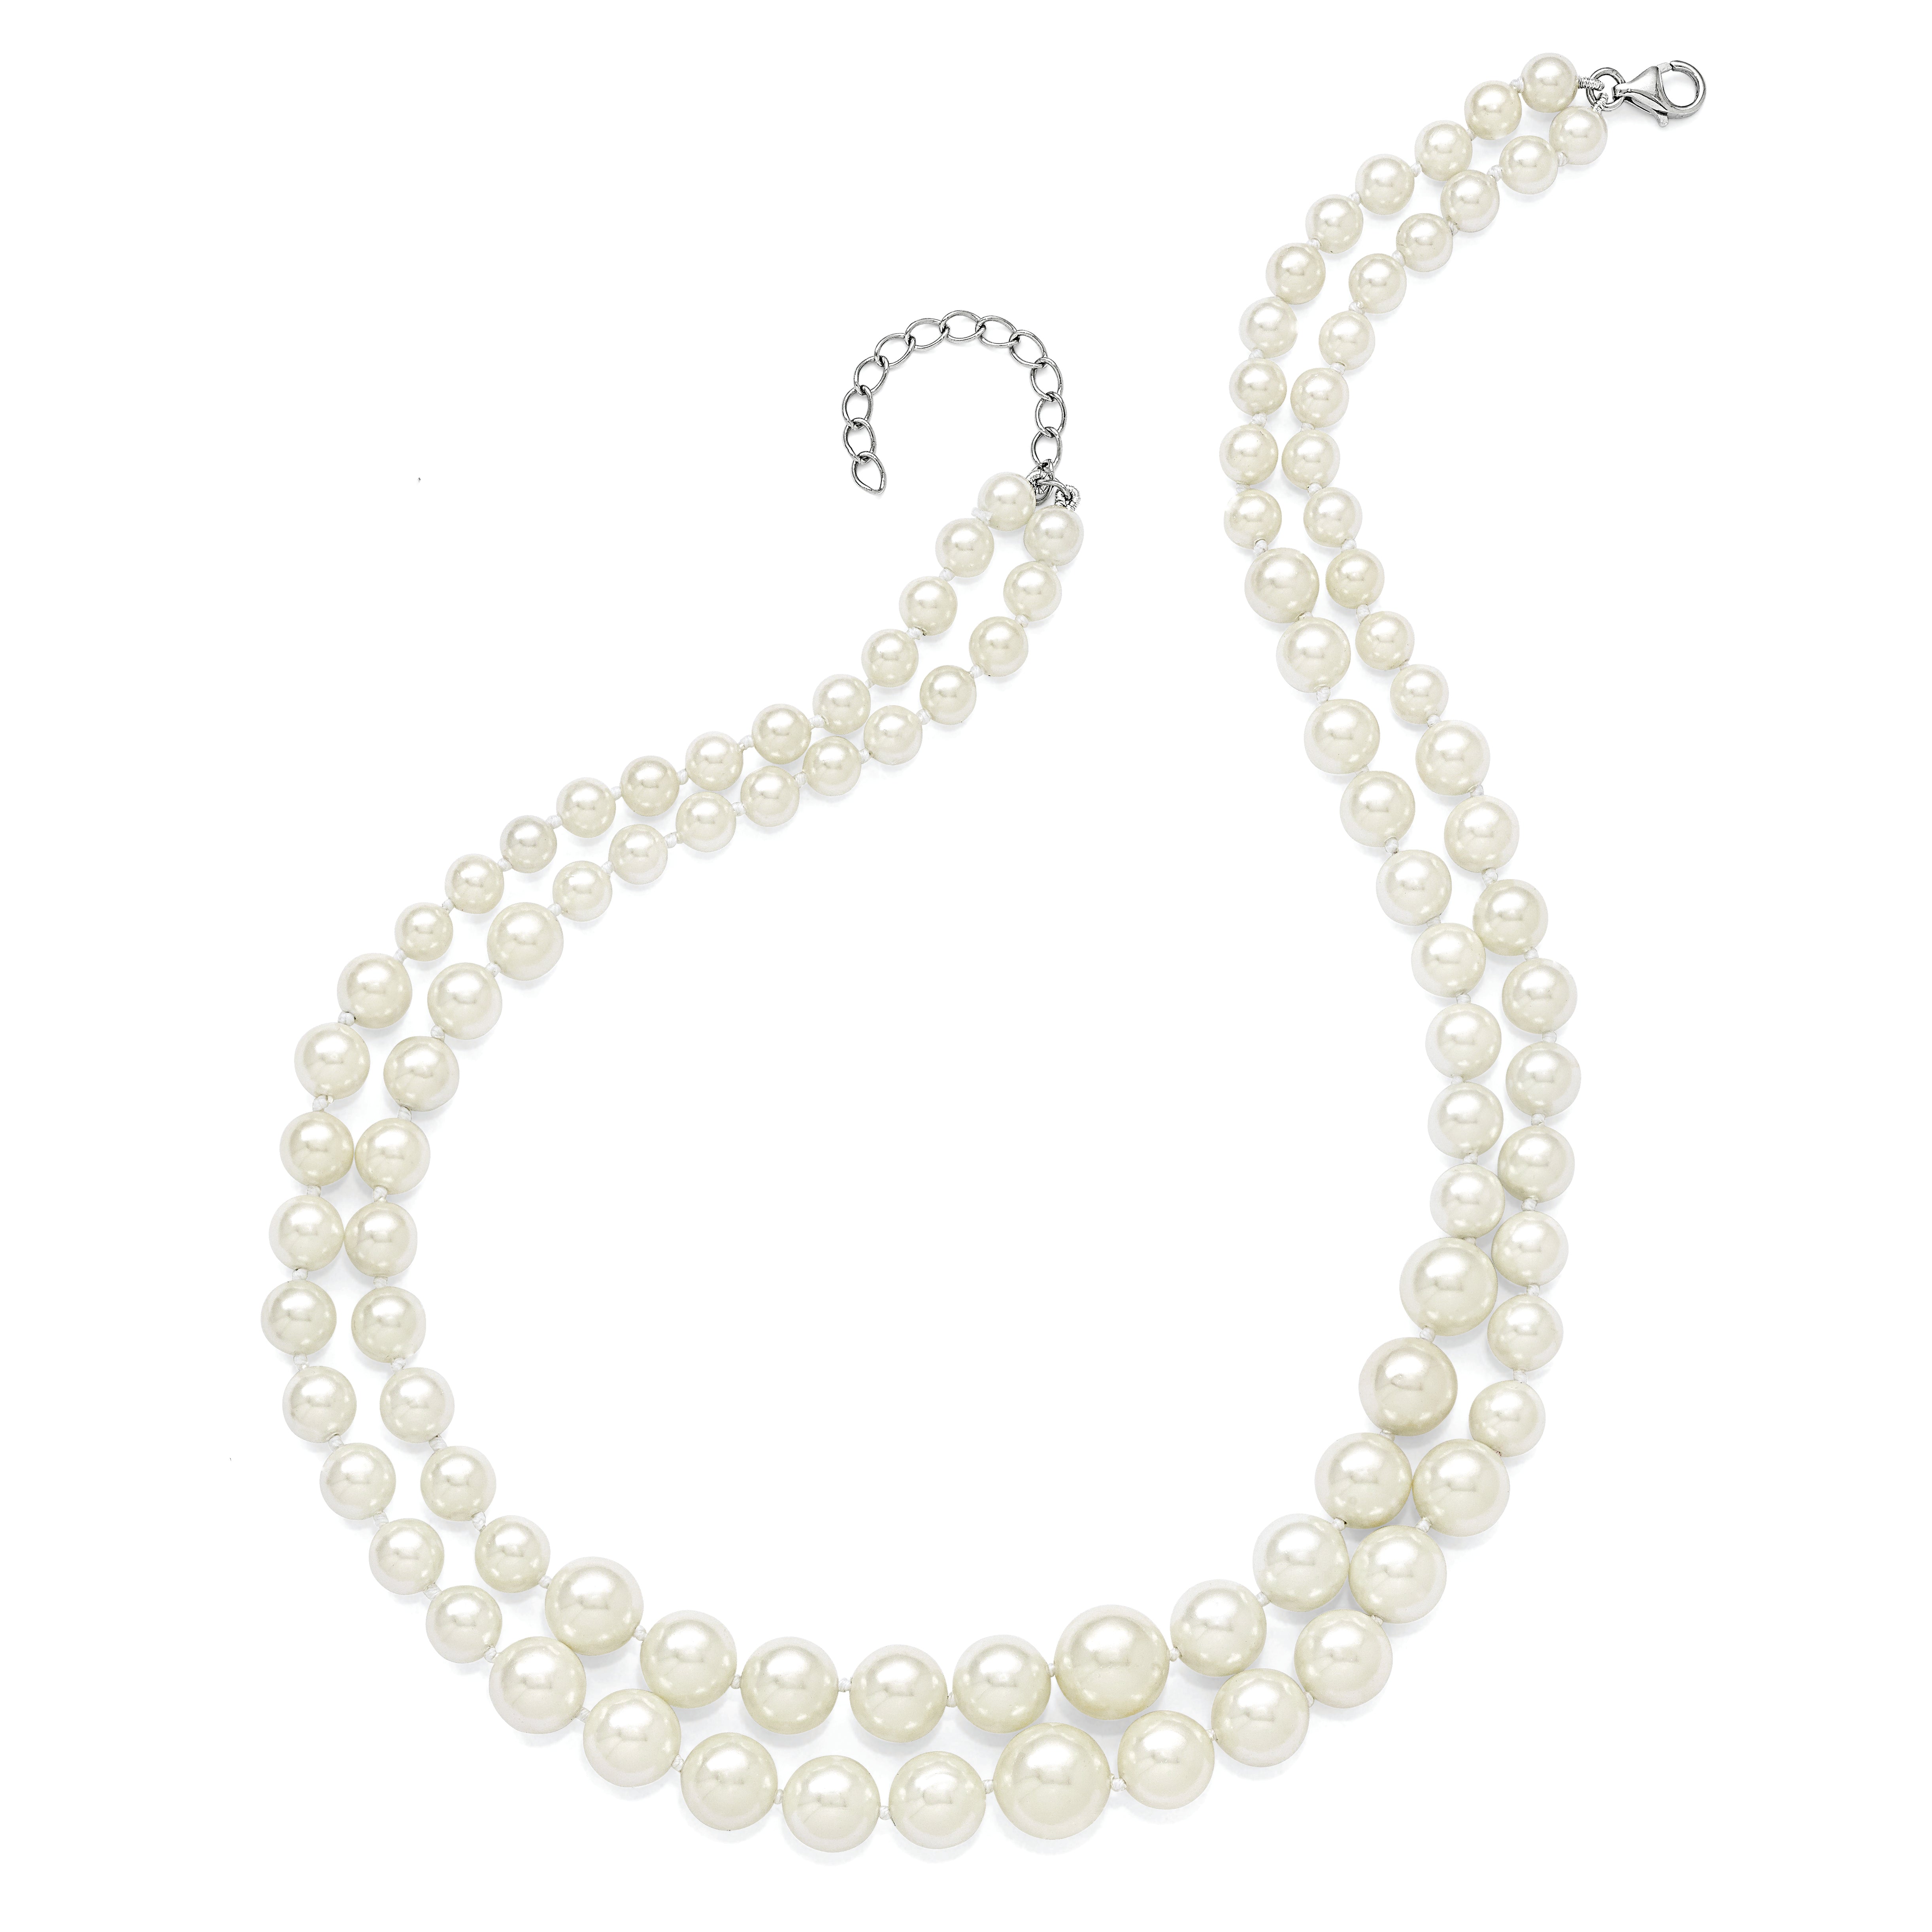 Majestik Sterling Silver Rhodium-plated 2 Row 6-12mm Graduated White Imitation Shell Pearl Hand-knotted Necklace with 2 inch Extender